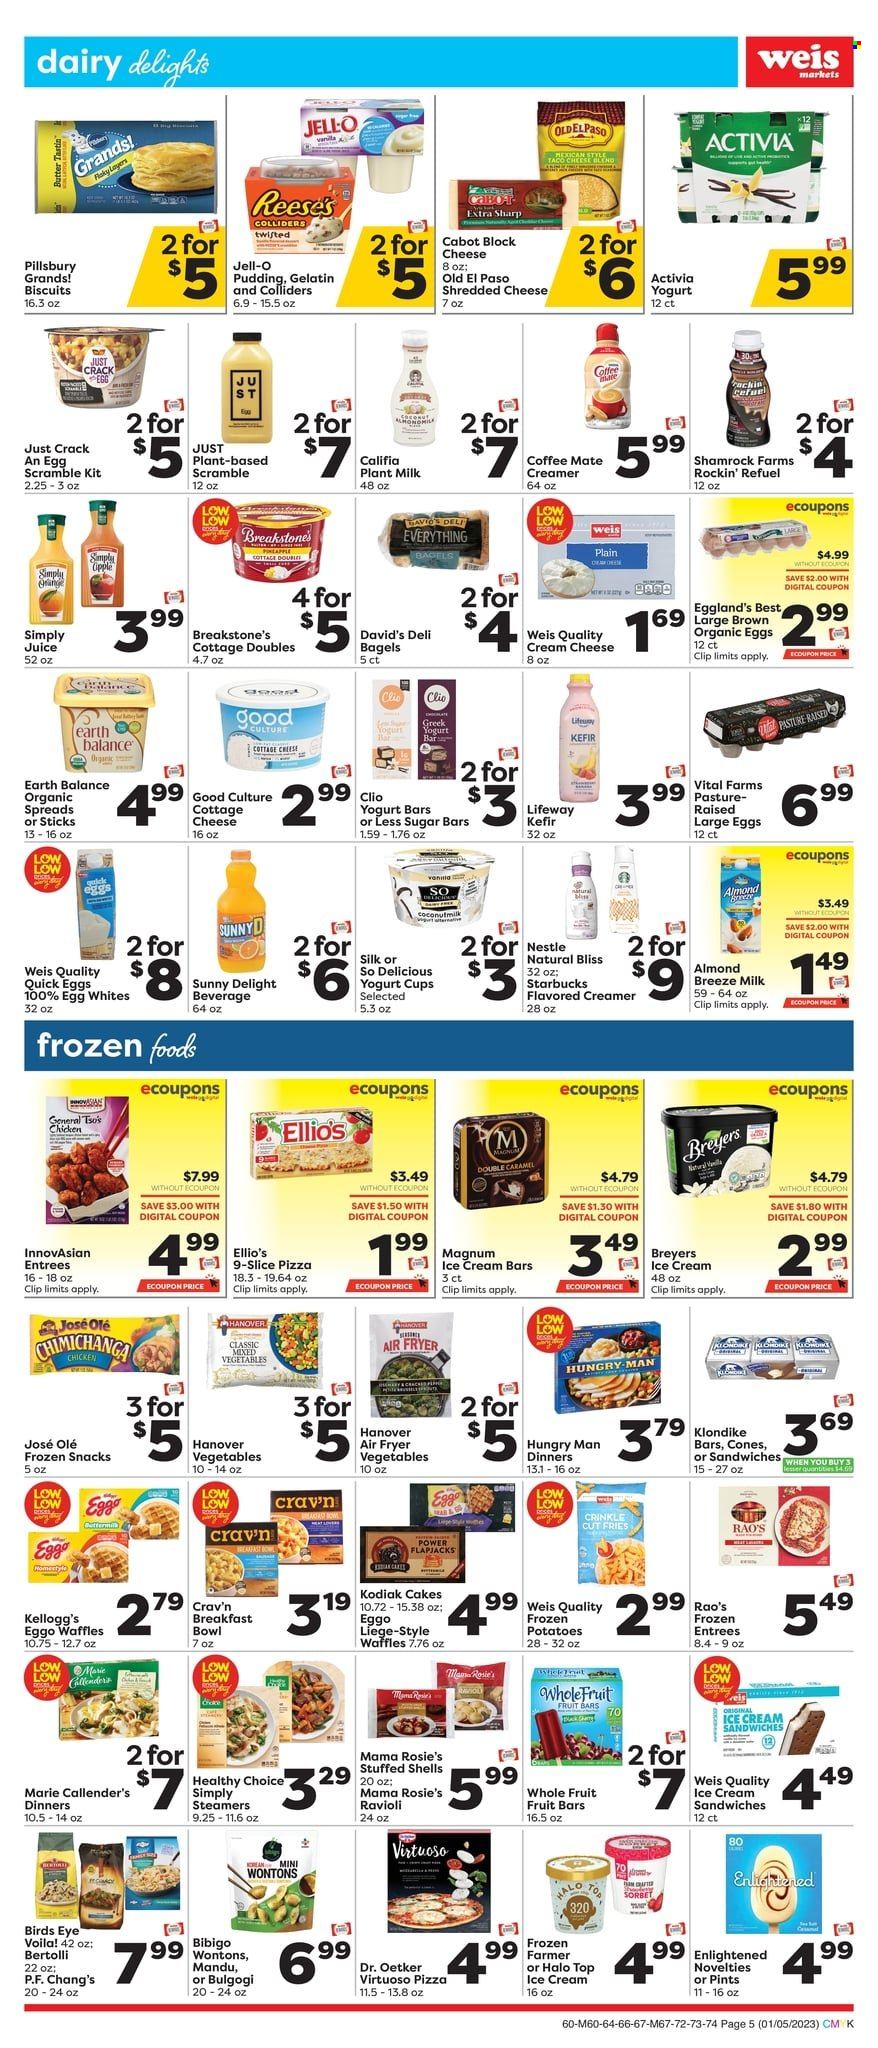 thumbnail - Weis Flyer - 01/05/2023 - 02/01/2023 - Sales products - bagels, cake, Old El Paso, waffles, potatoes, ravioli, pizza, breakfast bowl, Pillsbury, Bird's Eye, Healthy Choice, Marie Callender's, Bertolli, cottage cheese, shredded cheese, Dr. Oetker, pudding, Activia, Coffee-Mate, milk, Silk, Almond Breeze, kefir, large eggs, creamer, Magnum, ice cream, ice cream bars, ice cream sandwich, Reese's, Enlightened lce Cream, mixed vegetables, Nestlé, snack, Kellogg's, biscuit, Jell-O, juice, Starbucks, wine, rosé wine, rose. Page 5.